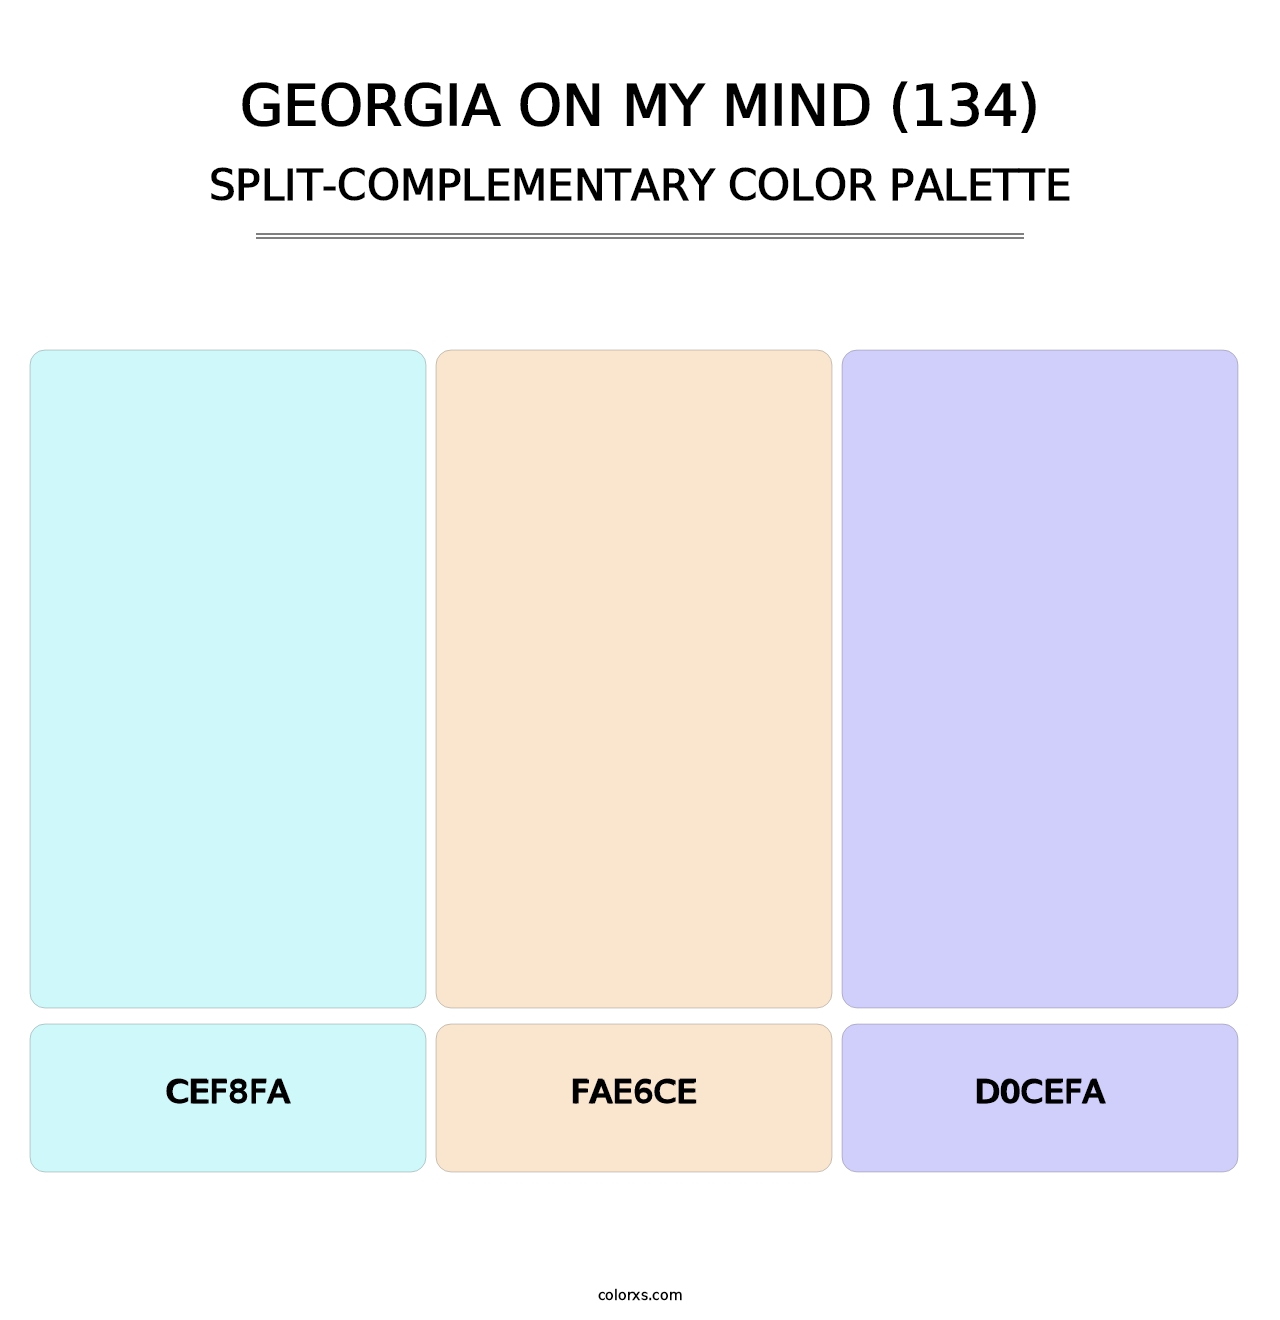 Georgia On My Mind (134) - Split-Complementary Color Palette